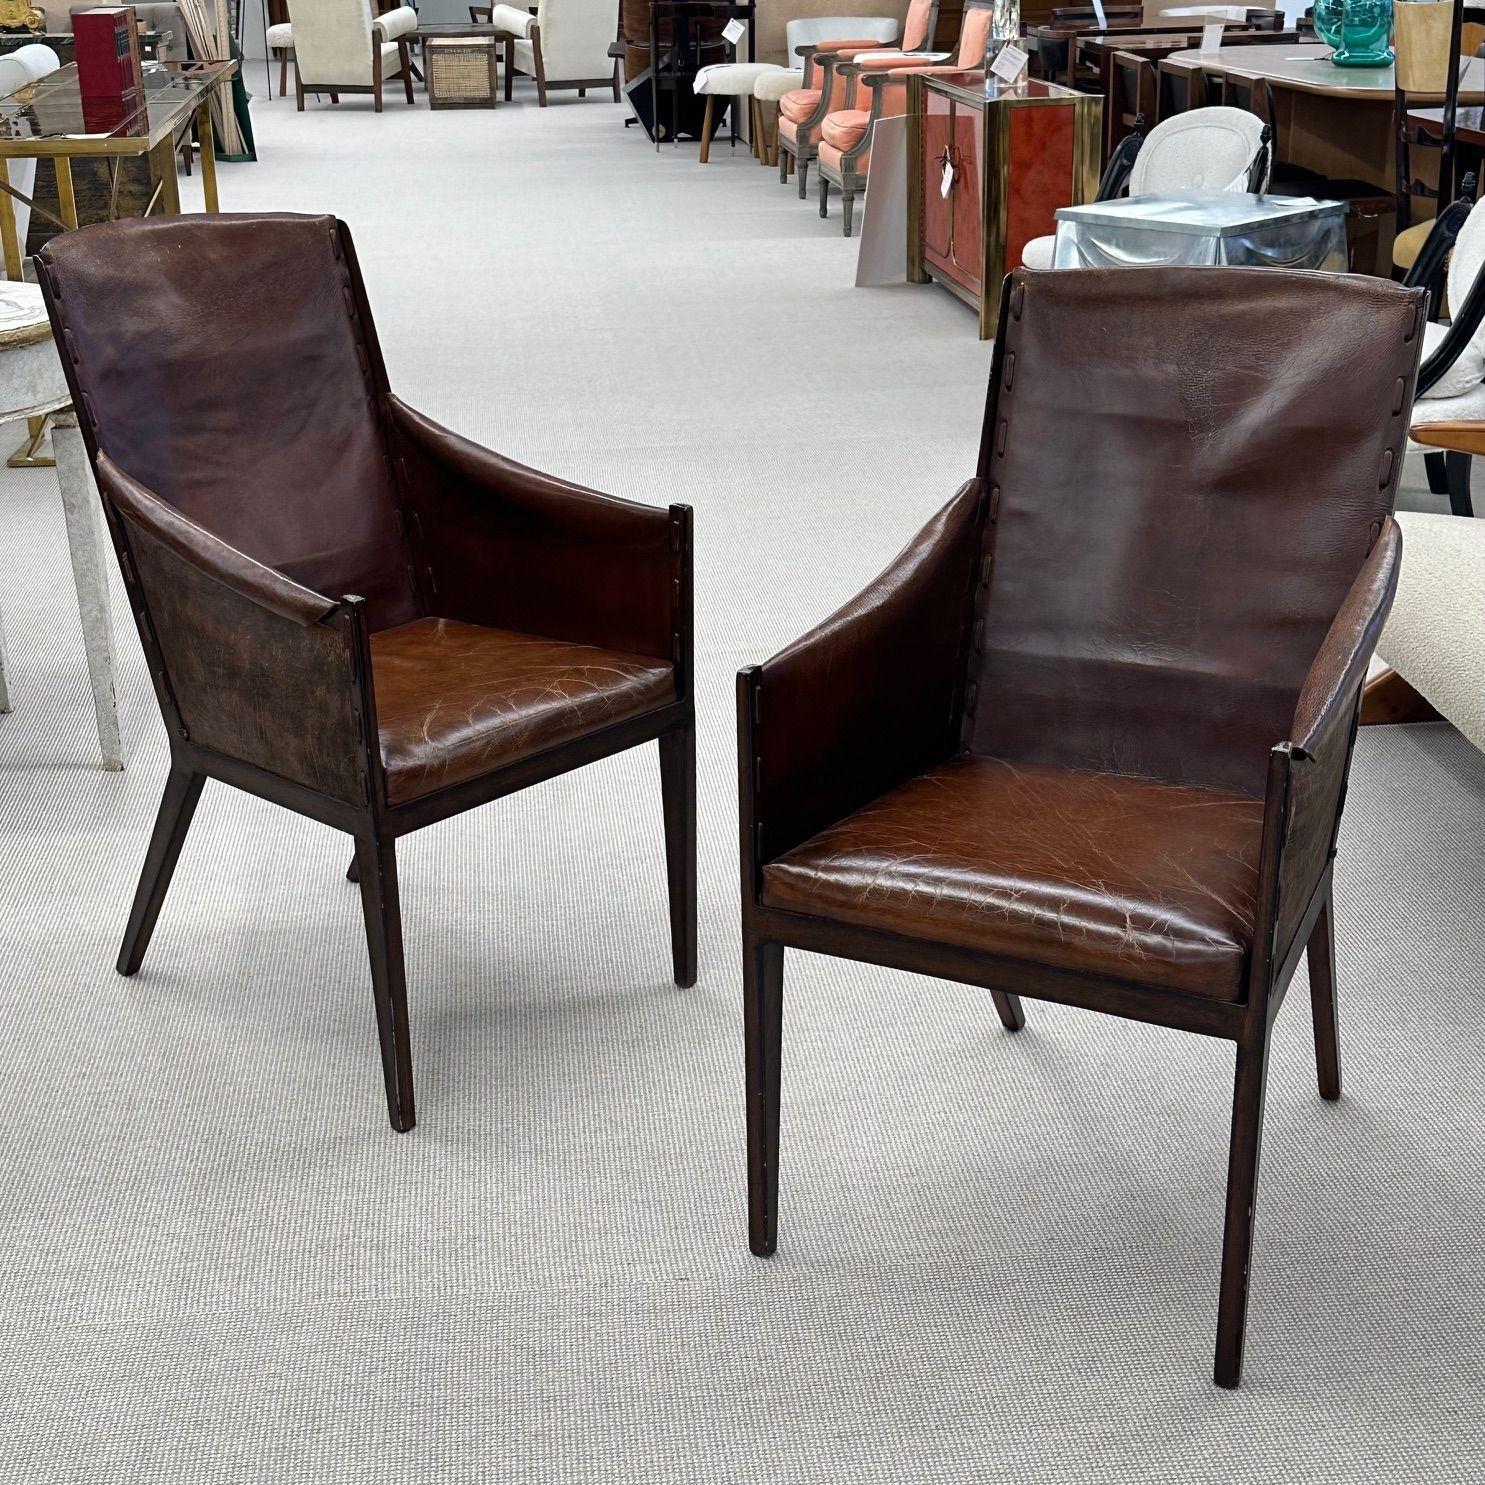 Jean-Michel Frank Style, Mid-Century Modern, Arm Chairs, Distressed Brown Leather

Pair of Jean Michel Frank style arm chairs. Weathered, heavy gauge distressed leather wrapped on patinated iron frames. Strong and sturdy with high backs. Great for